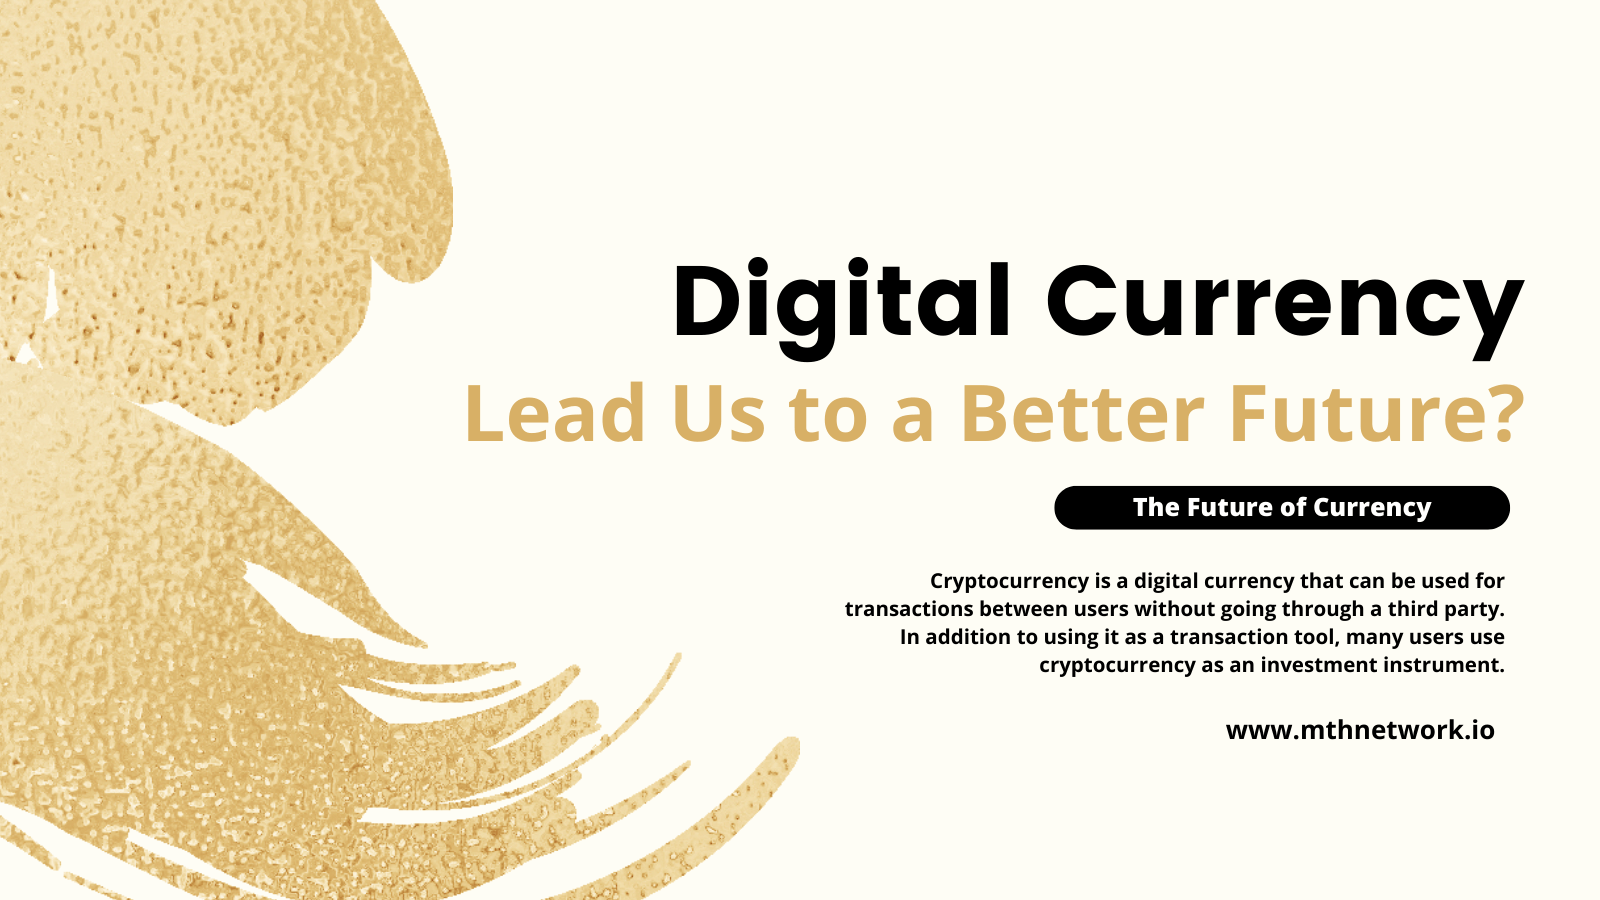 How Digital Currency Will Lead Us to a Better Future?